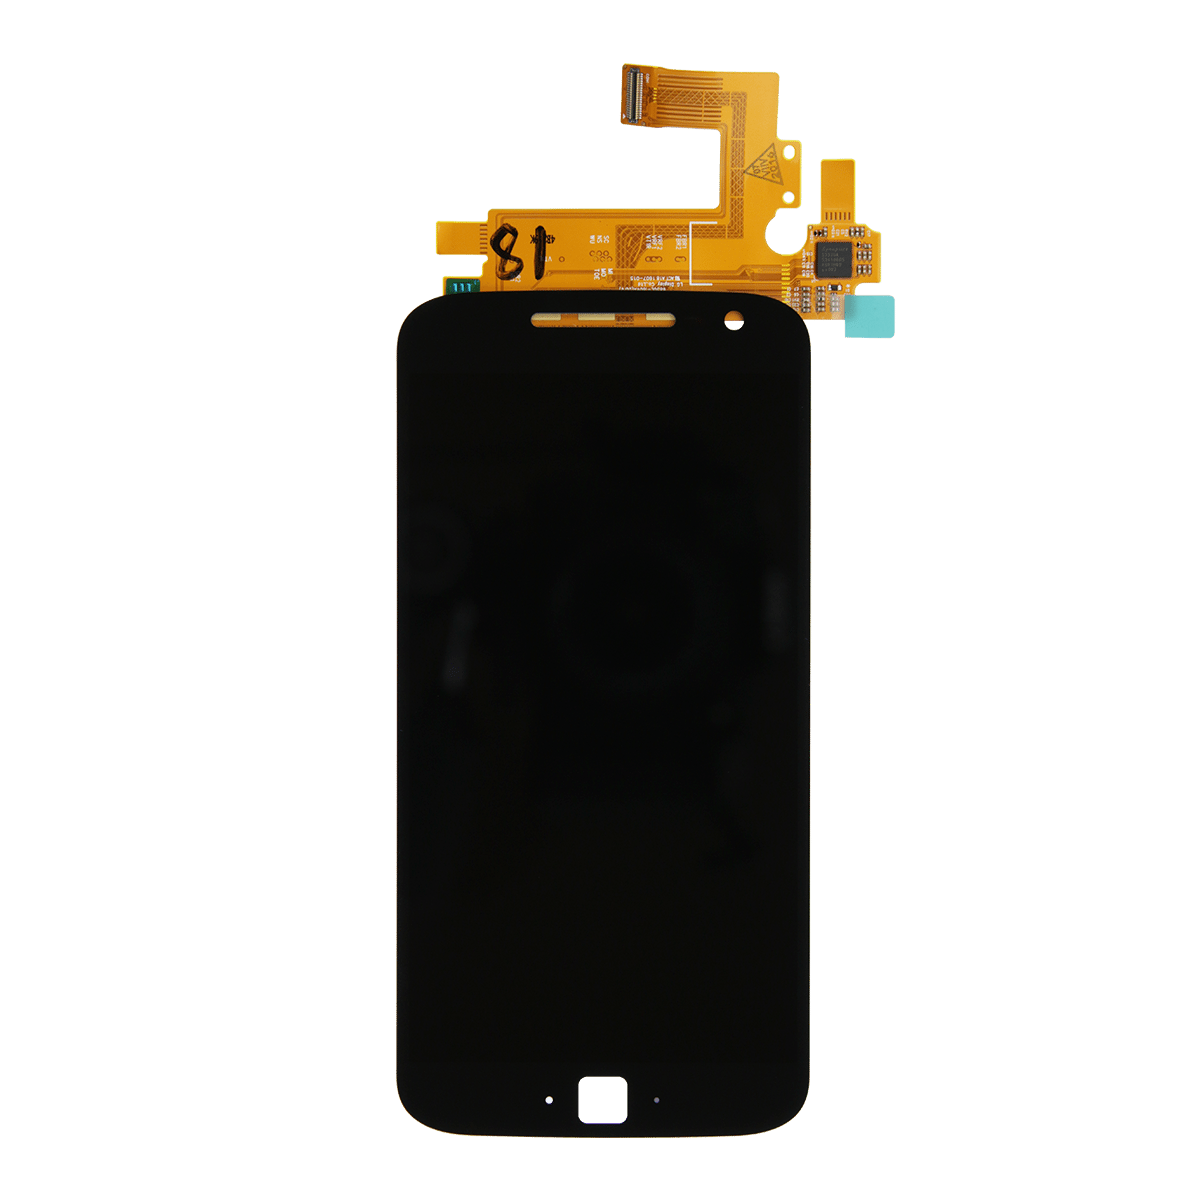 Moto G4 Plus LCD and Touch Screen Replacement